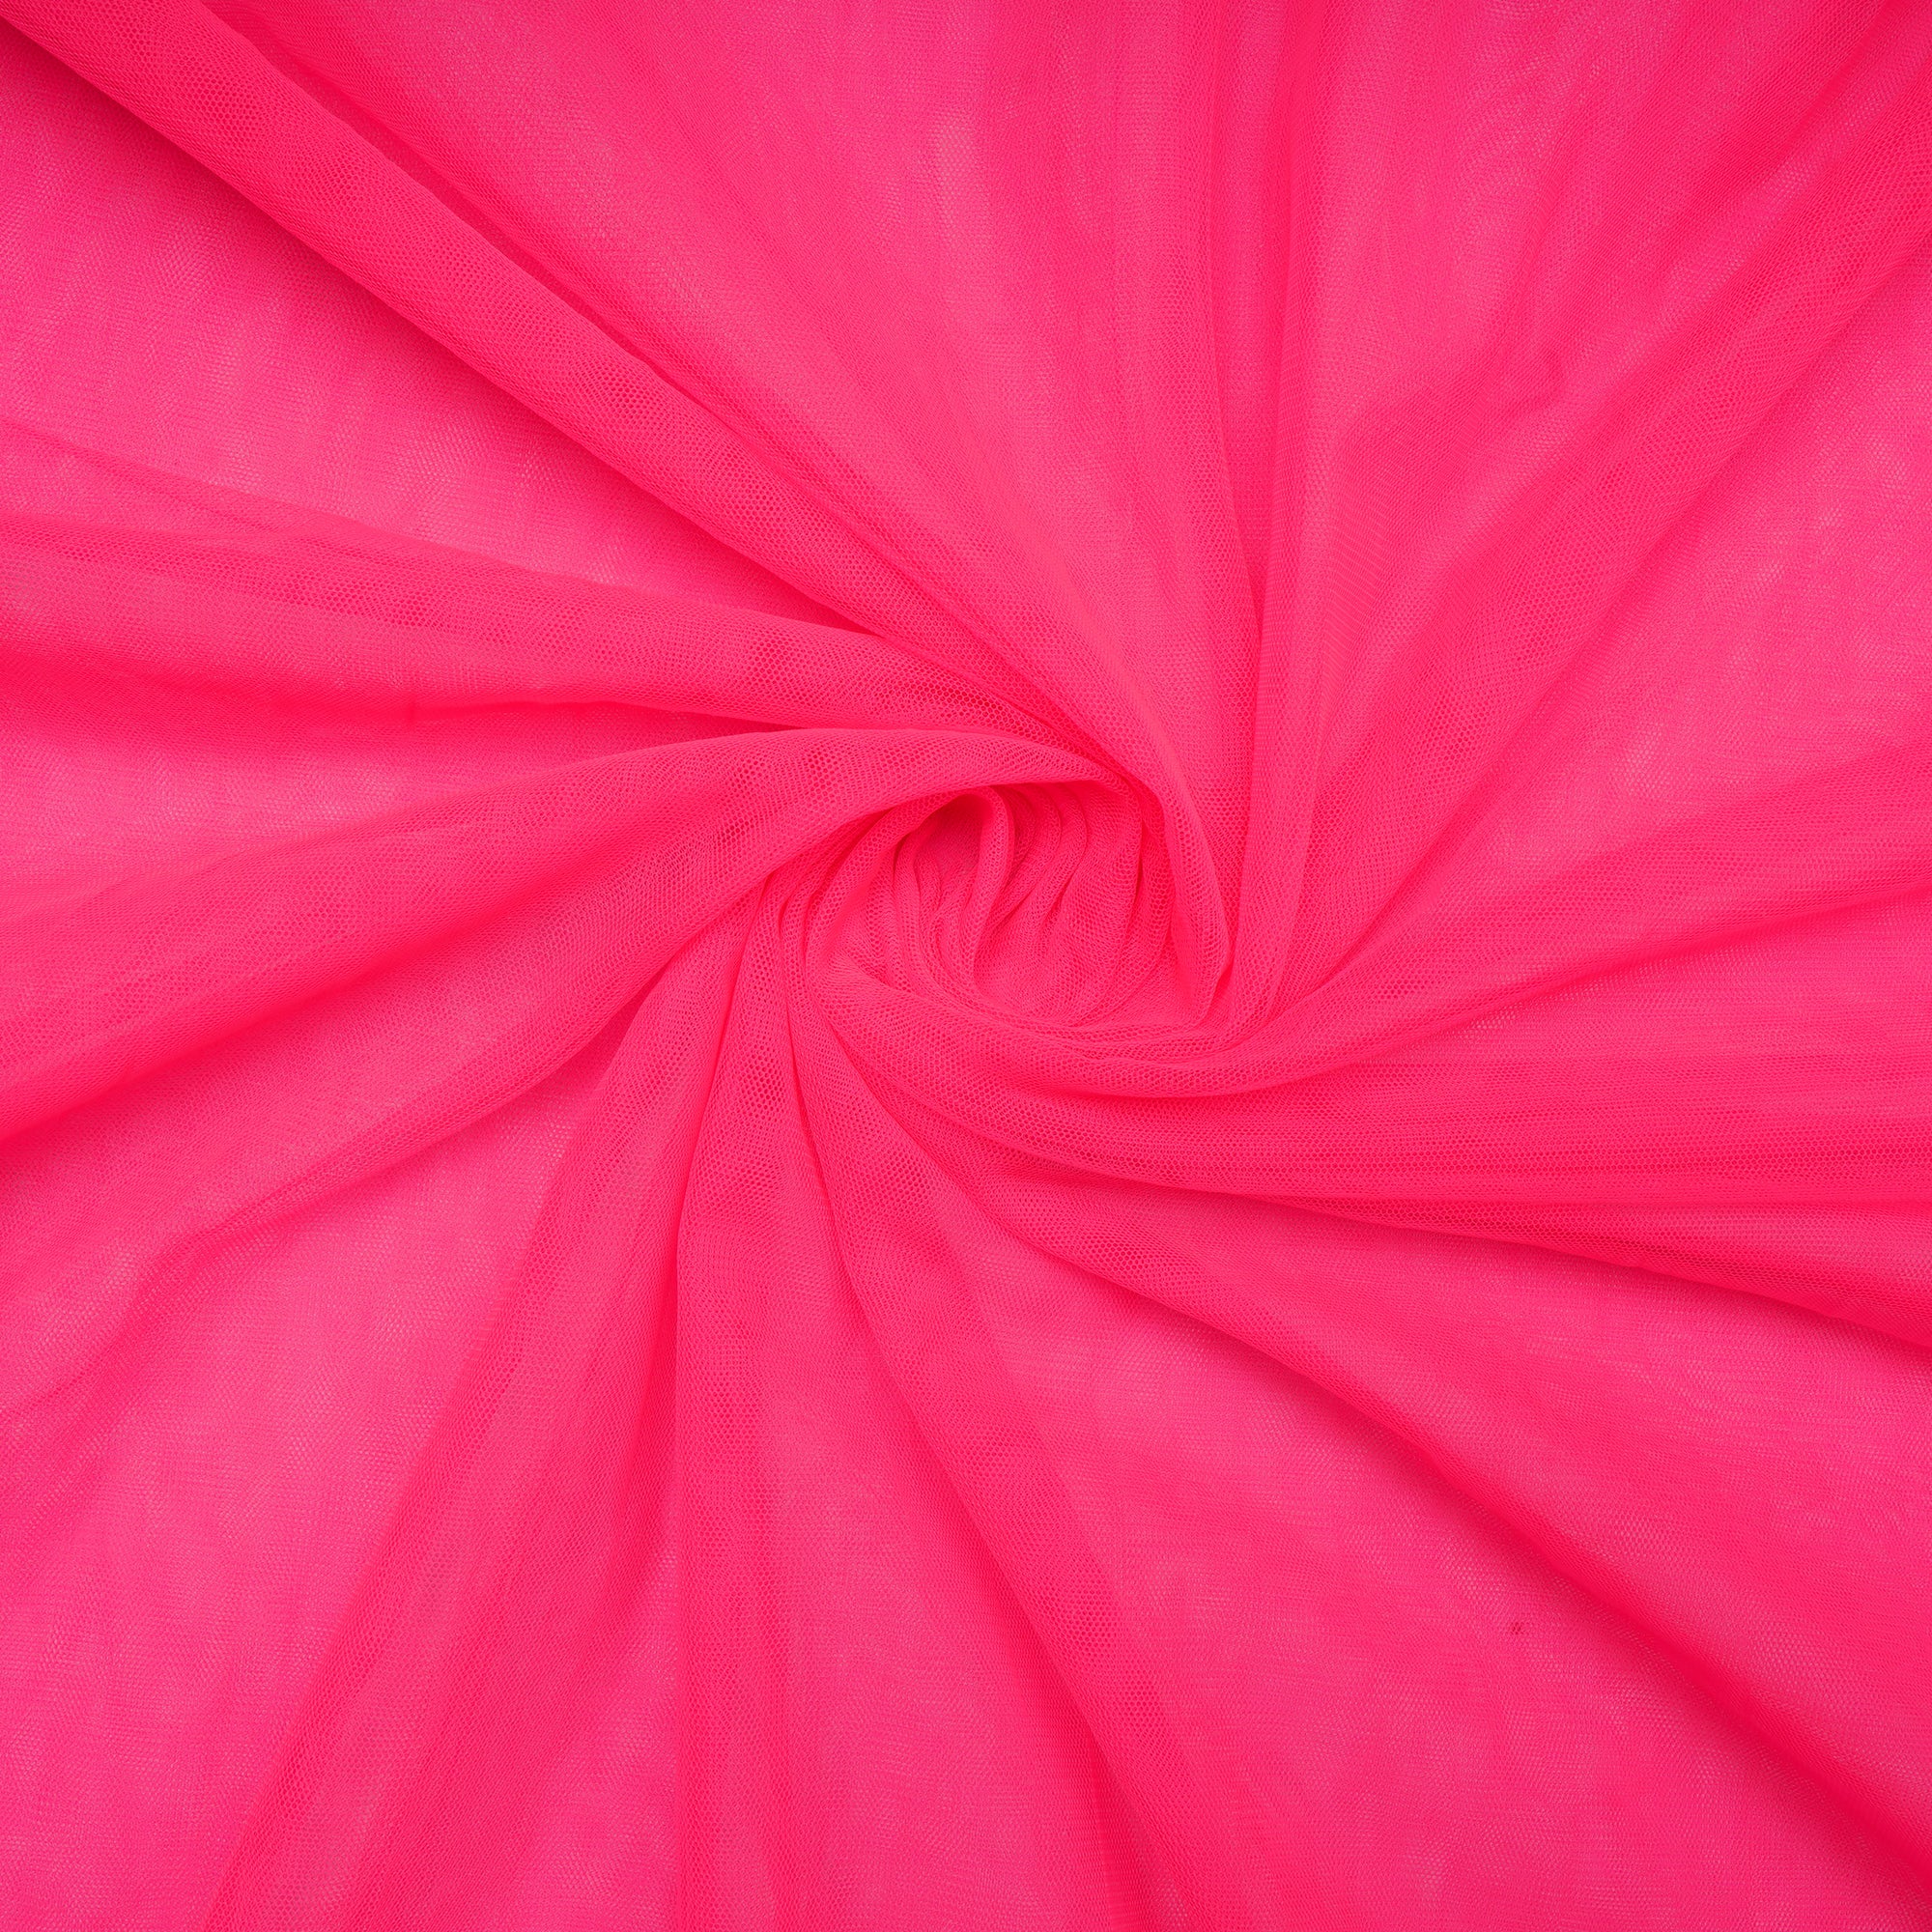 Piece Dyed Pink Butterfly Nylon Net Fabric